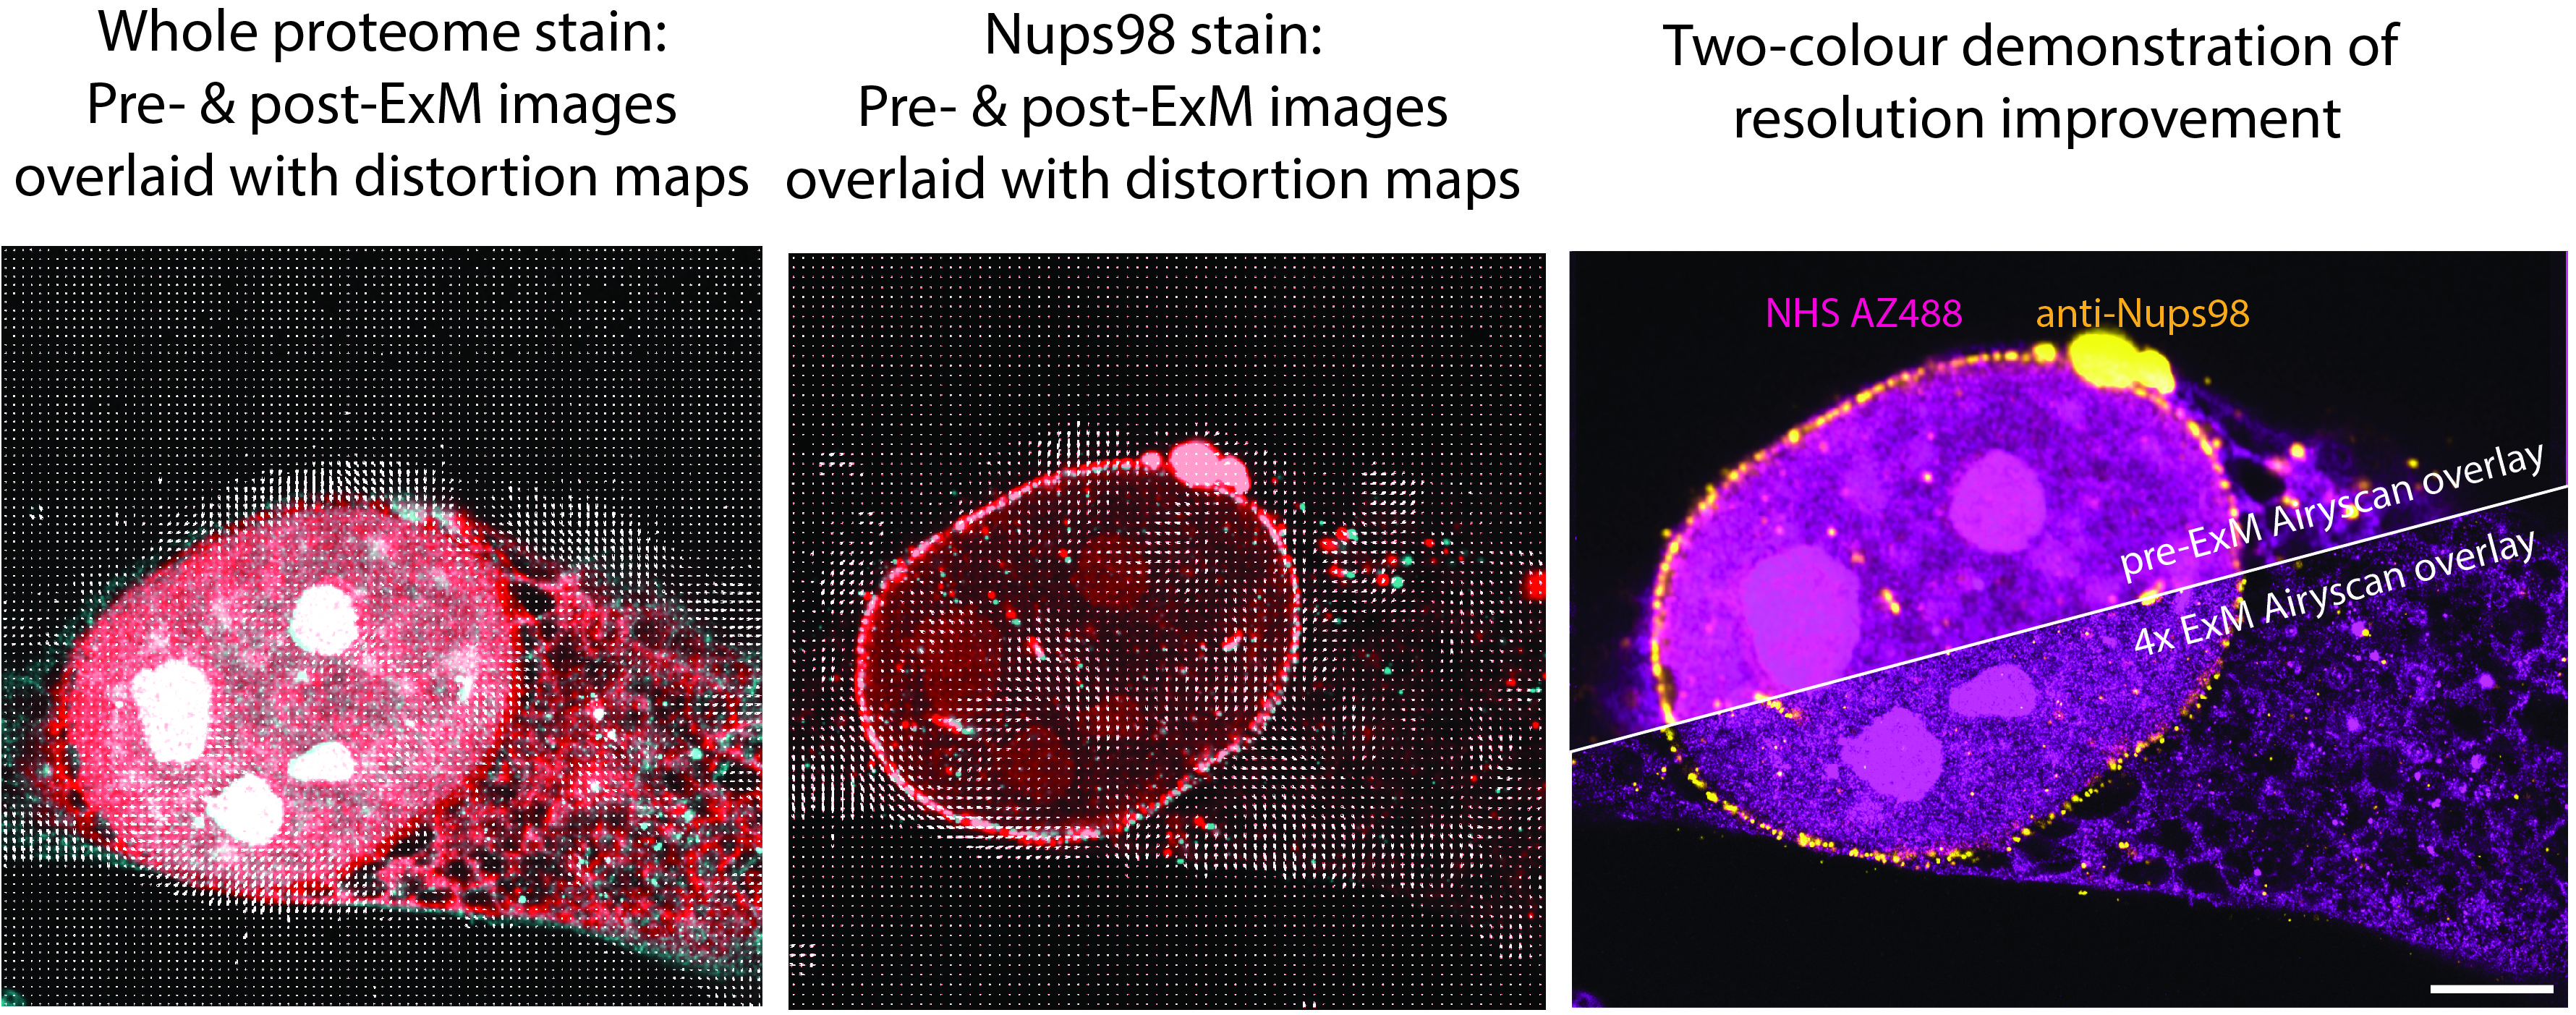 Pre- and post-ExM imaging unlocked the ability to check the distortions in specific cellular regions independently, and display the effective resolution improvement directly.